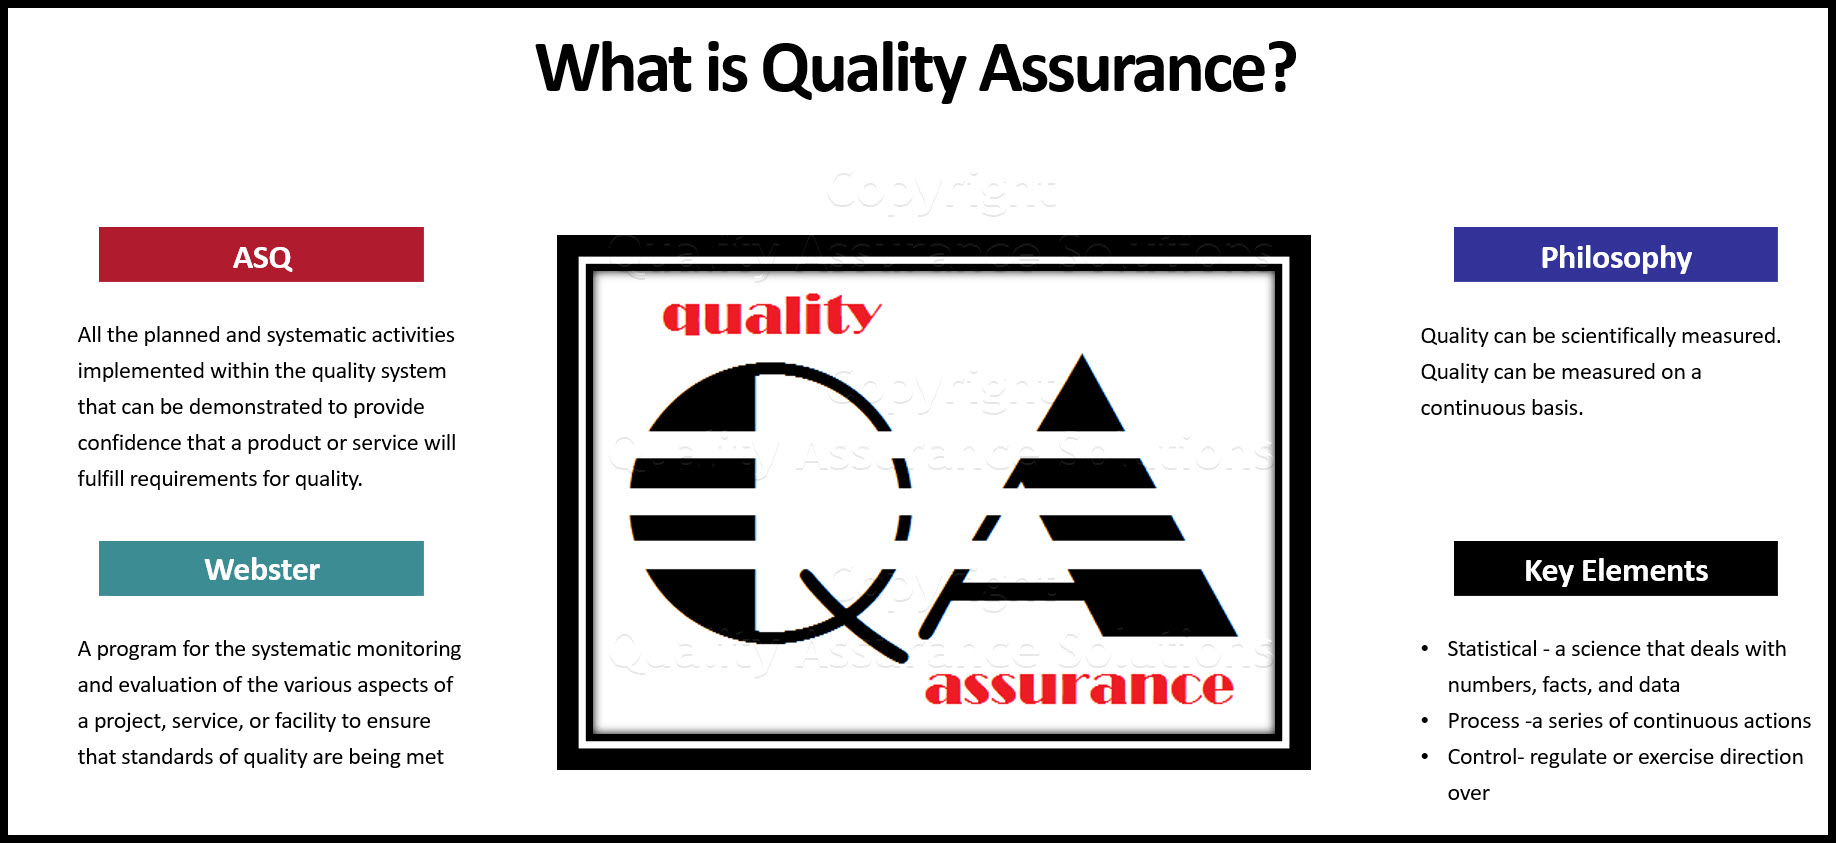 What is Quality Assurance? Article discusses history, Dr Deming, statistics, tools, processes, meaning of control and more. 